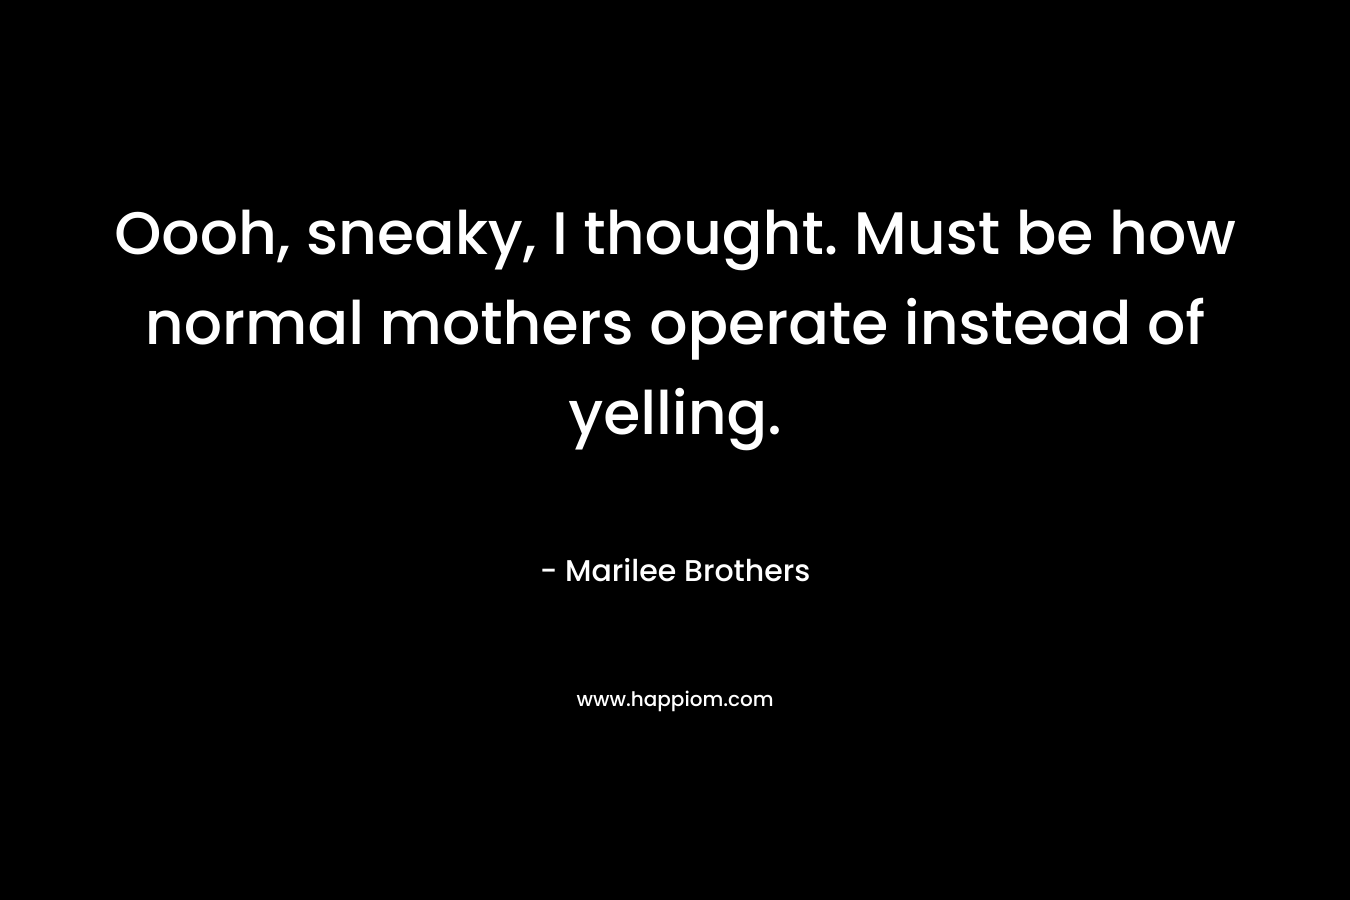 Oooh, sneaky, I thought. Must be how normal mothers operate instead of yelling.